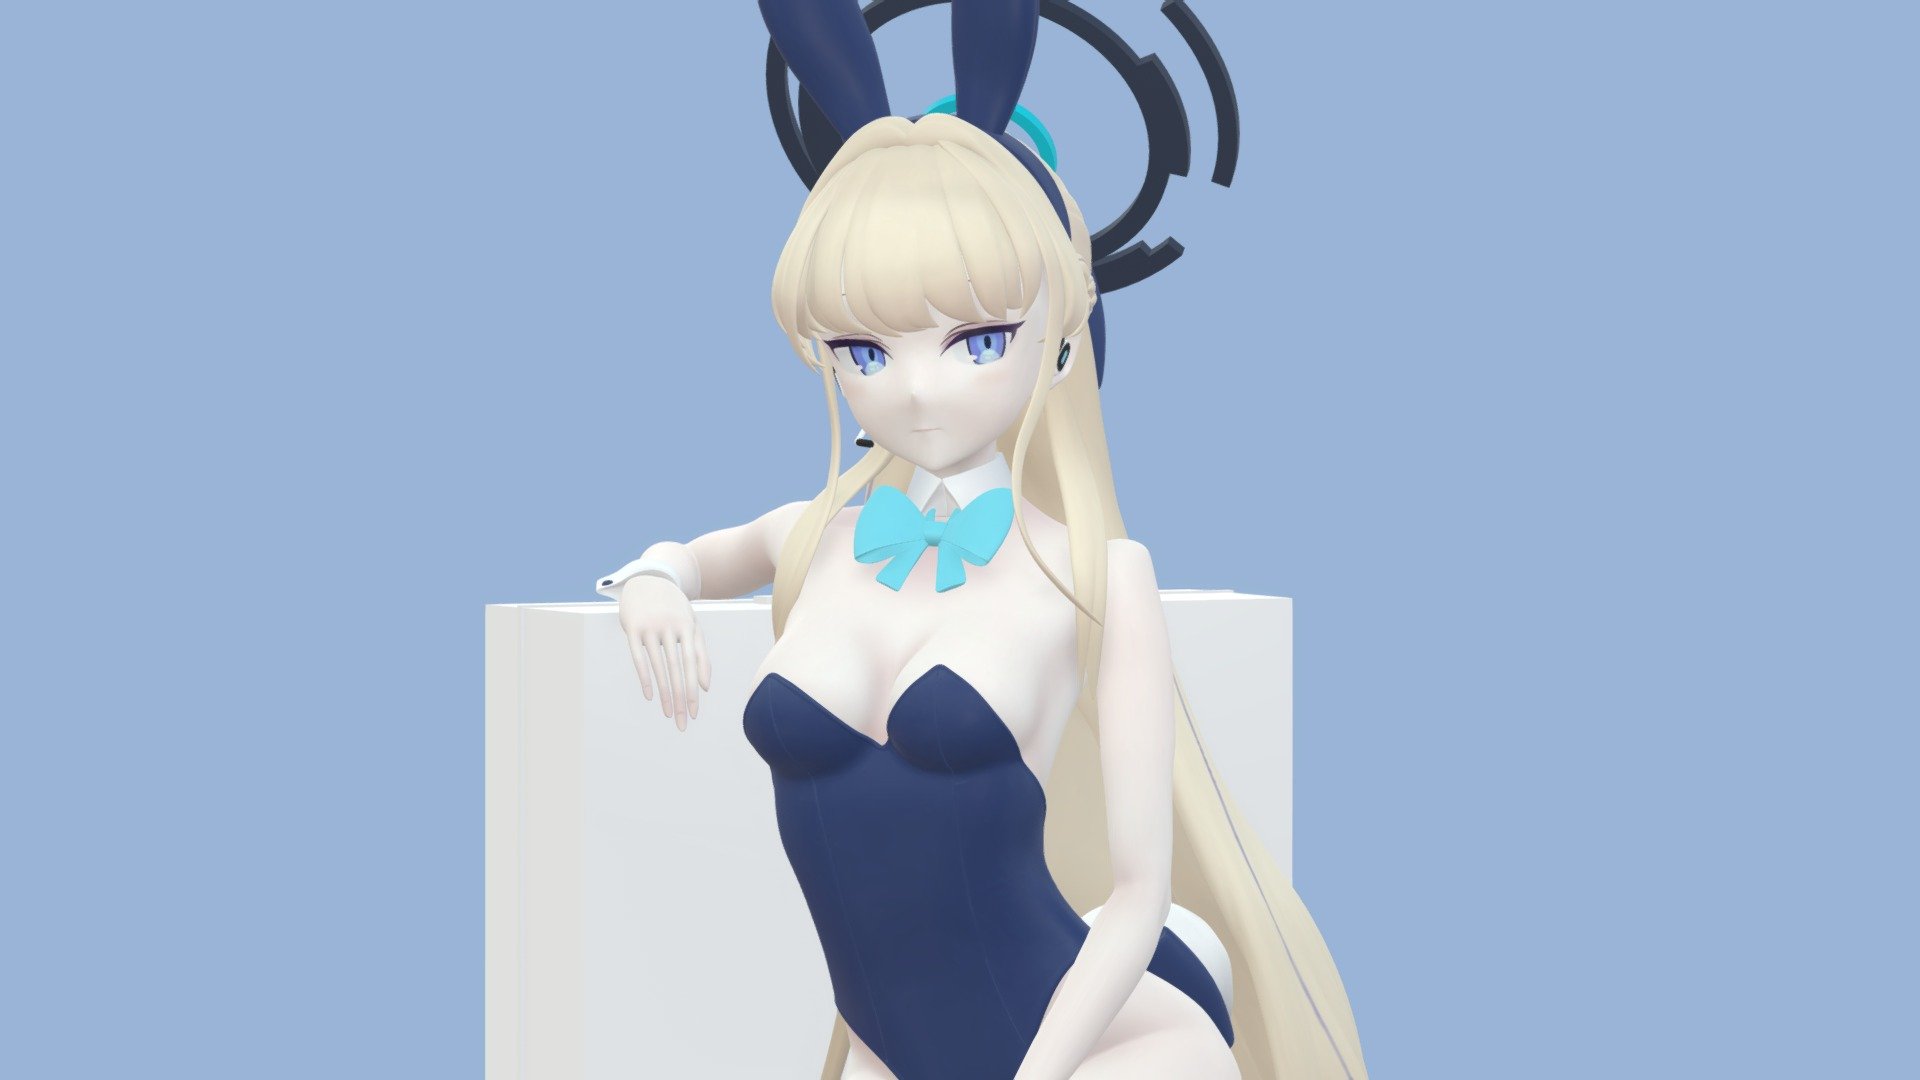 A fan art of Toki in a bunny girl from the Blue Archive.
It was announced at a limited-time event, so I made it to commemorate it.
https://www.pixiv.net/artworks/107669575 - Toki-bunnygirl - 3D model by davis-litchi 3d model